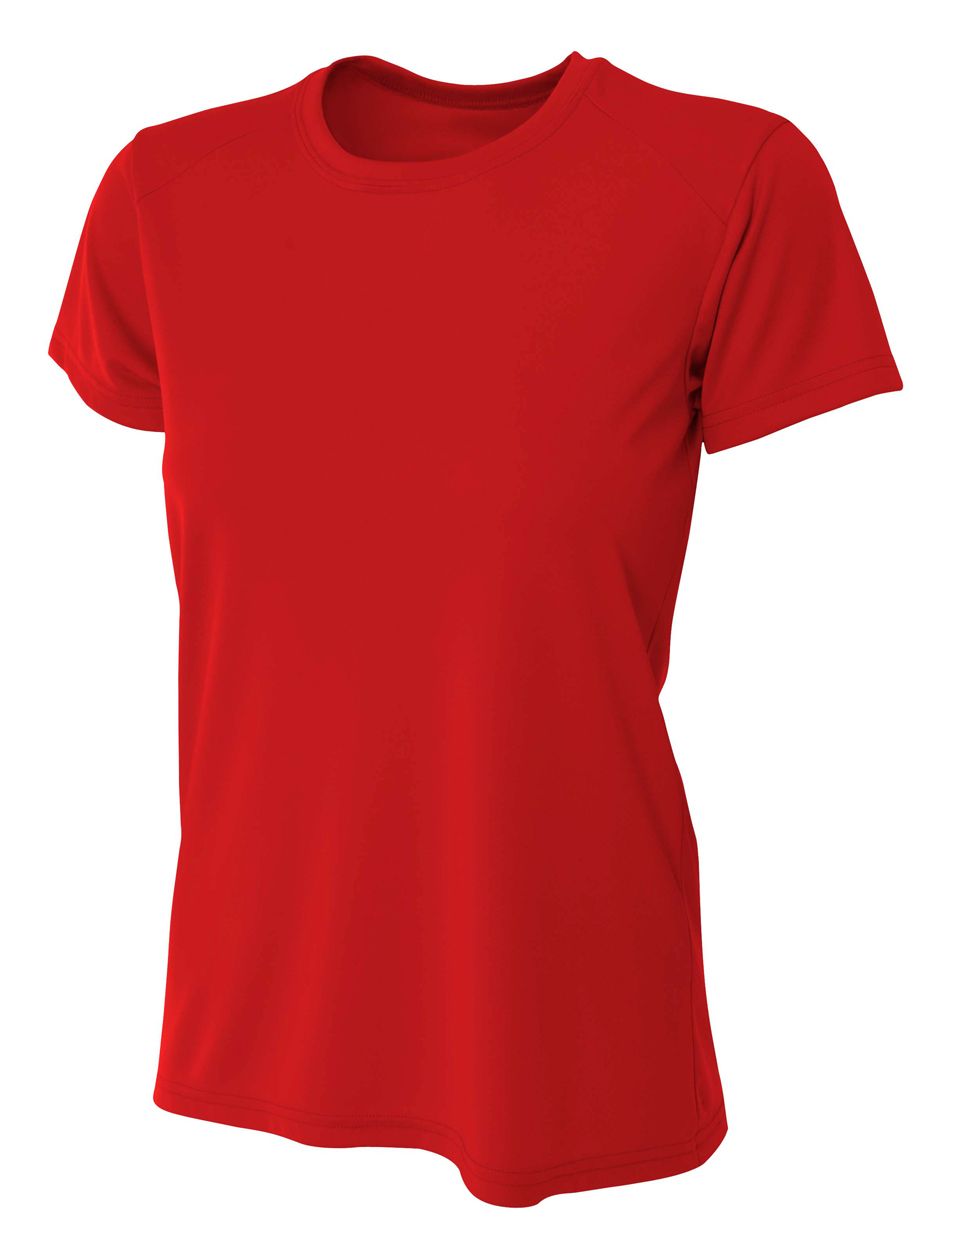 A4 Women's Cooling Performance Crew Training Jersey Scarlet Womens XSmall - Third Coast Soccer